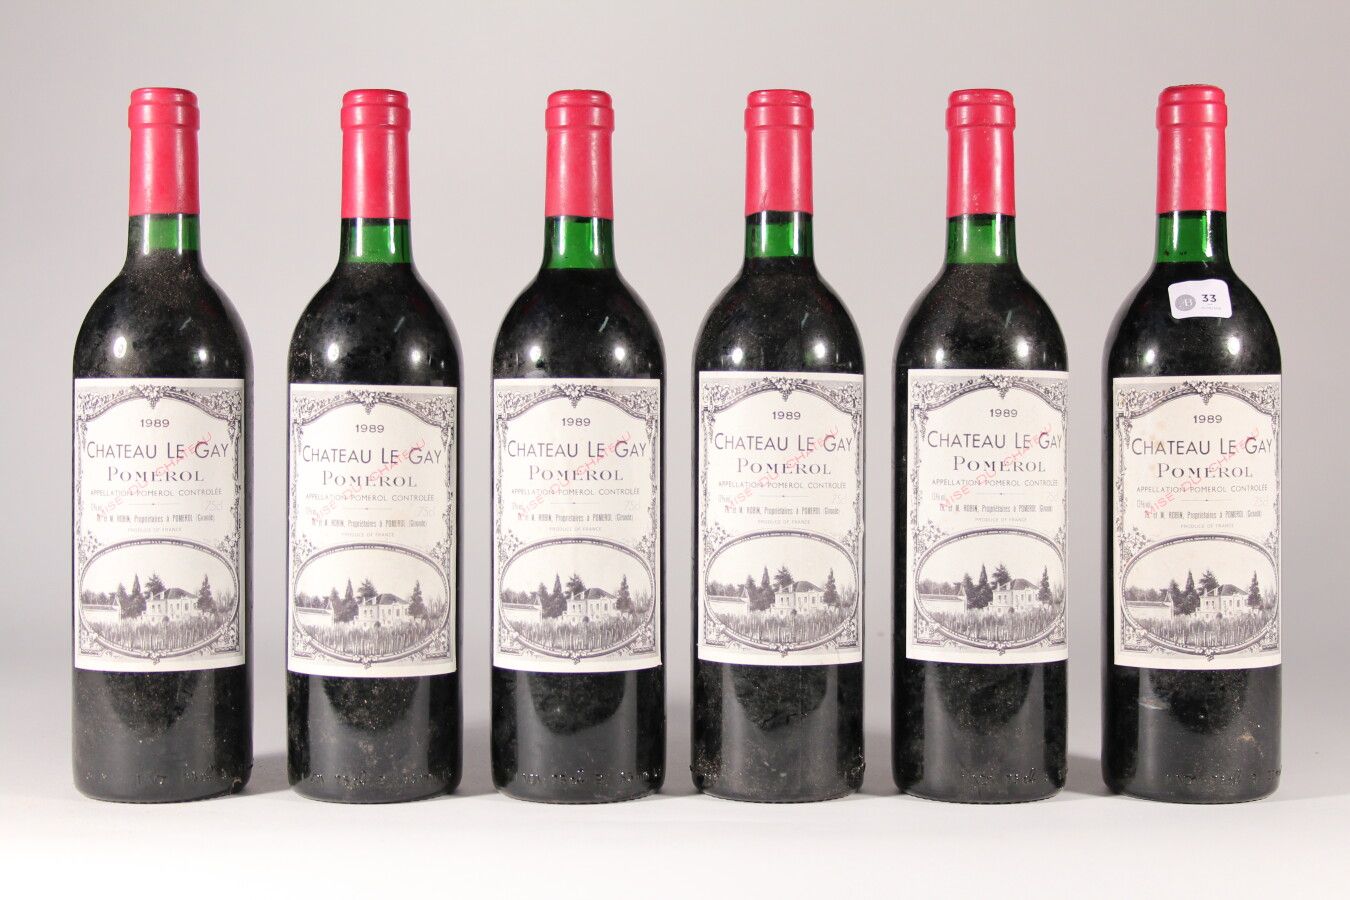 Null 1989 - Château Le Gay

Red Pomerol - 6 bottles (low neck)